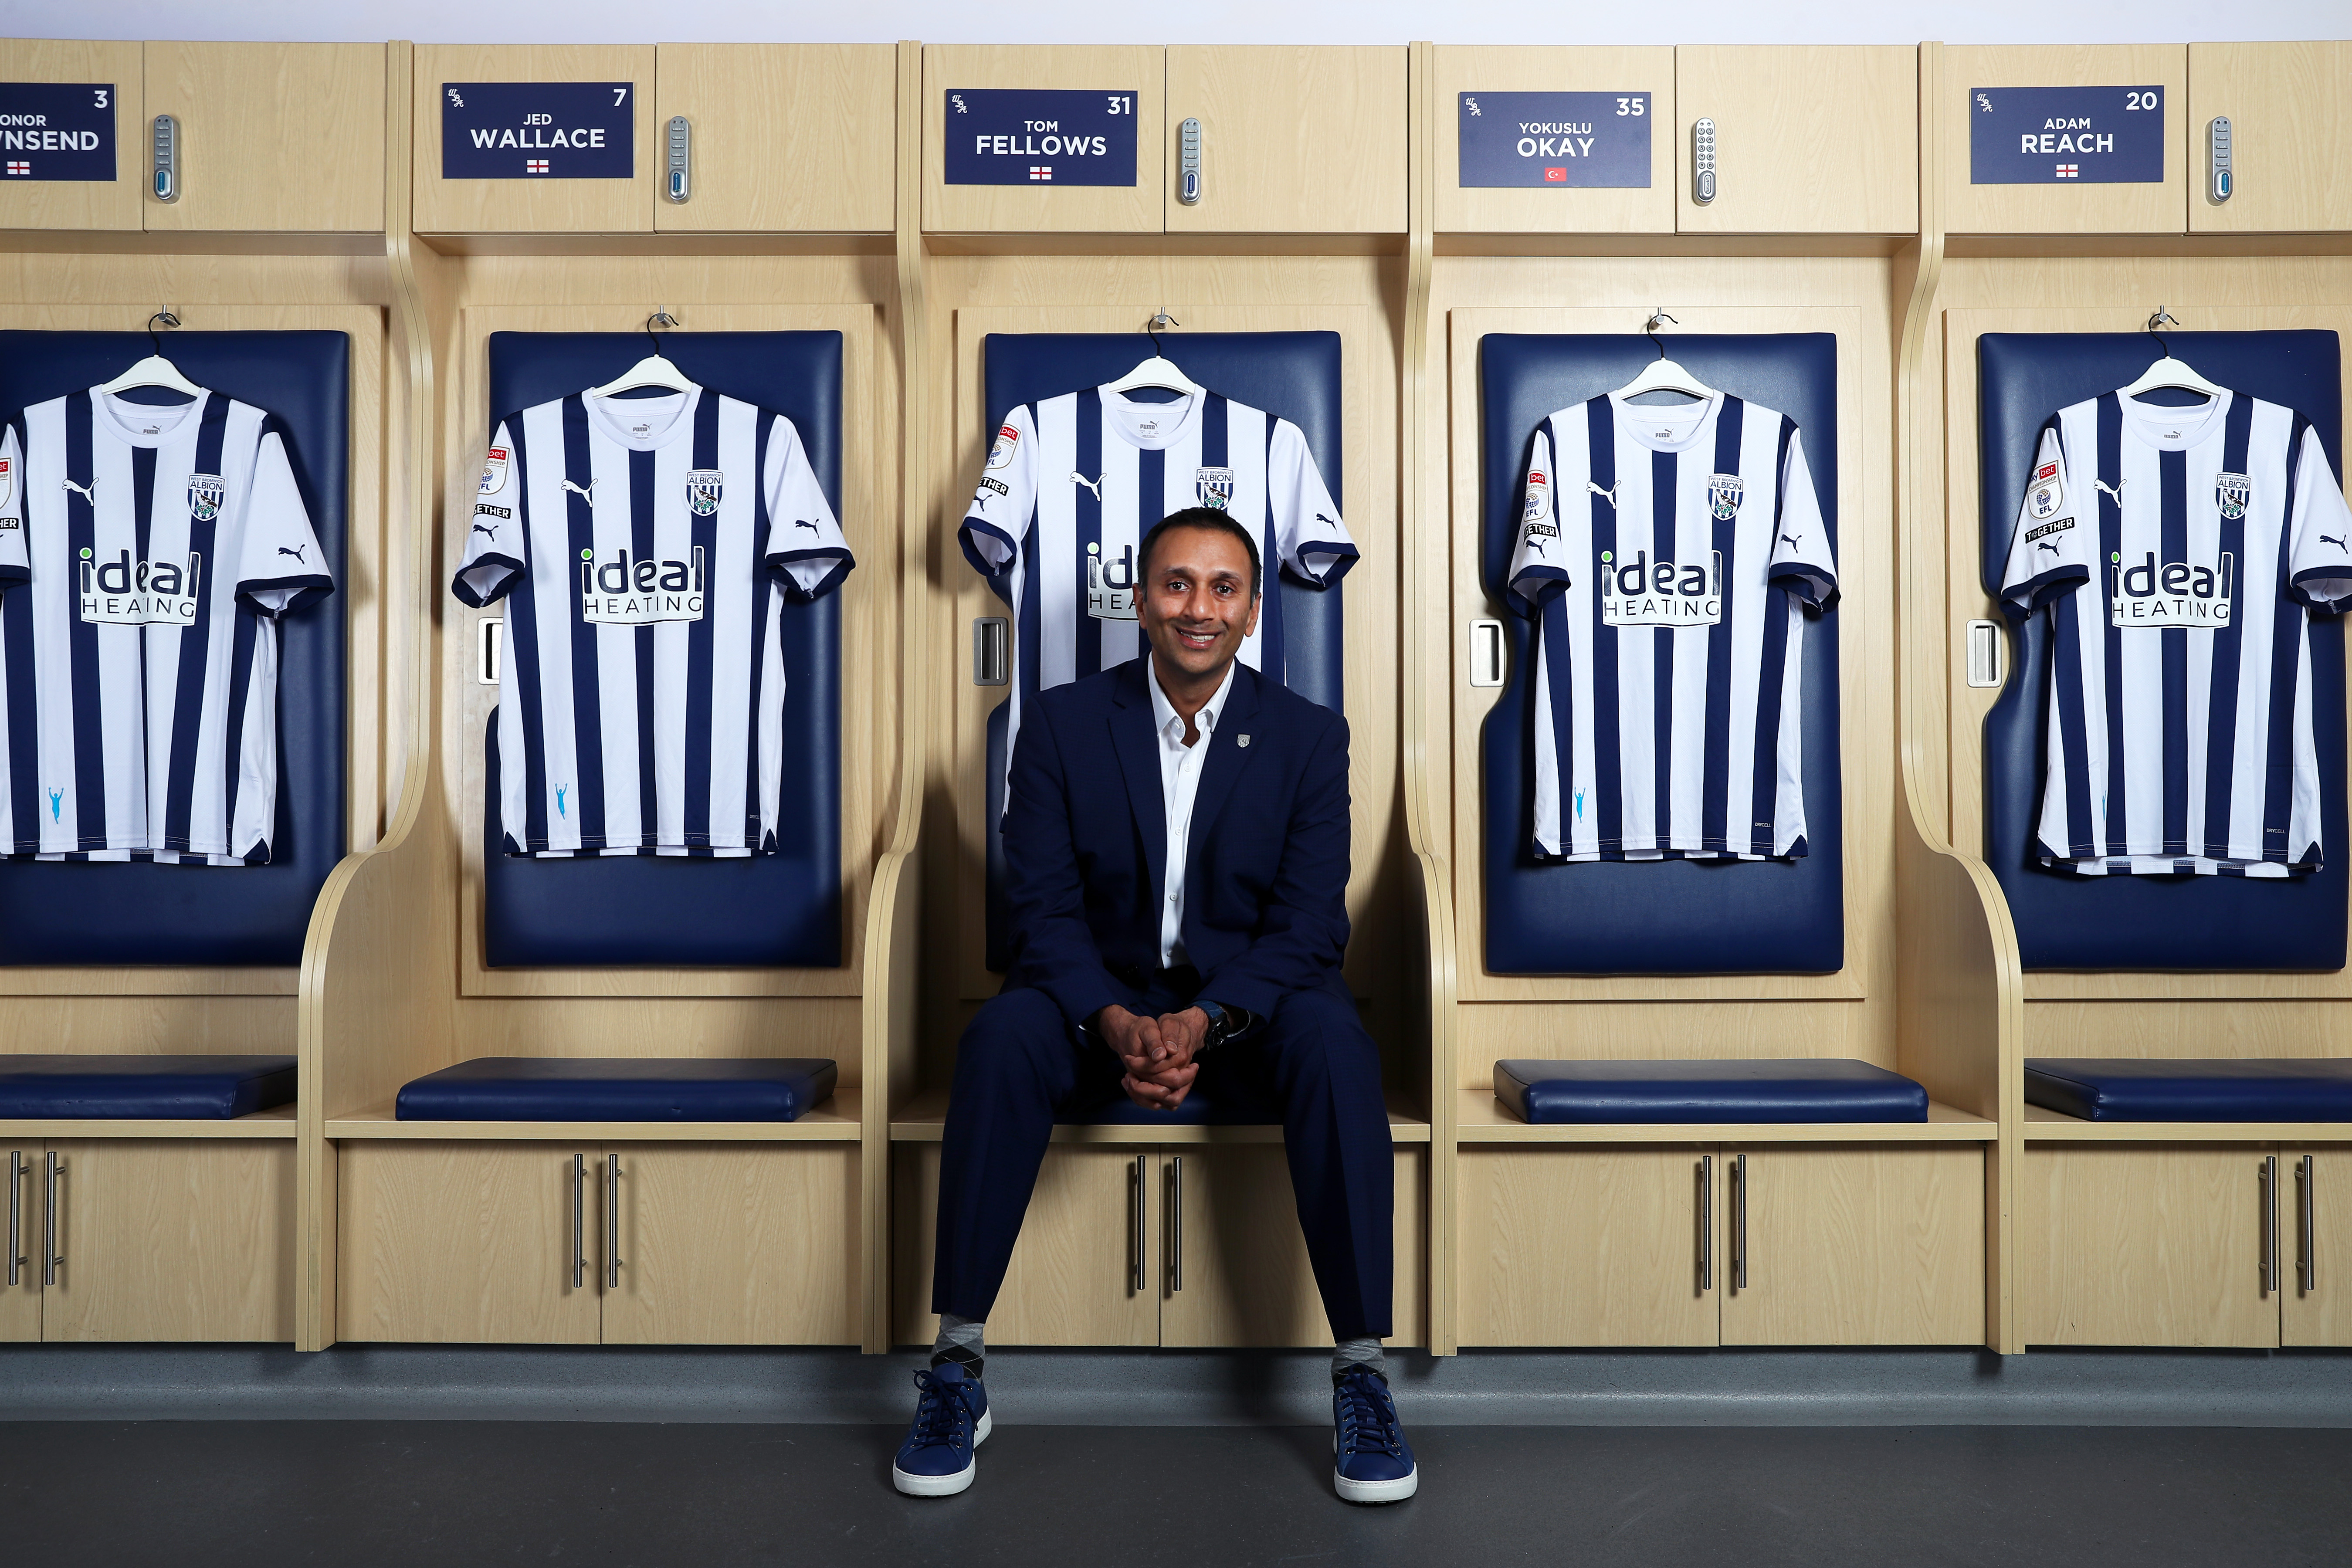 Florida-based Patels acquire 87.8% stake in West Brom